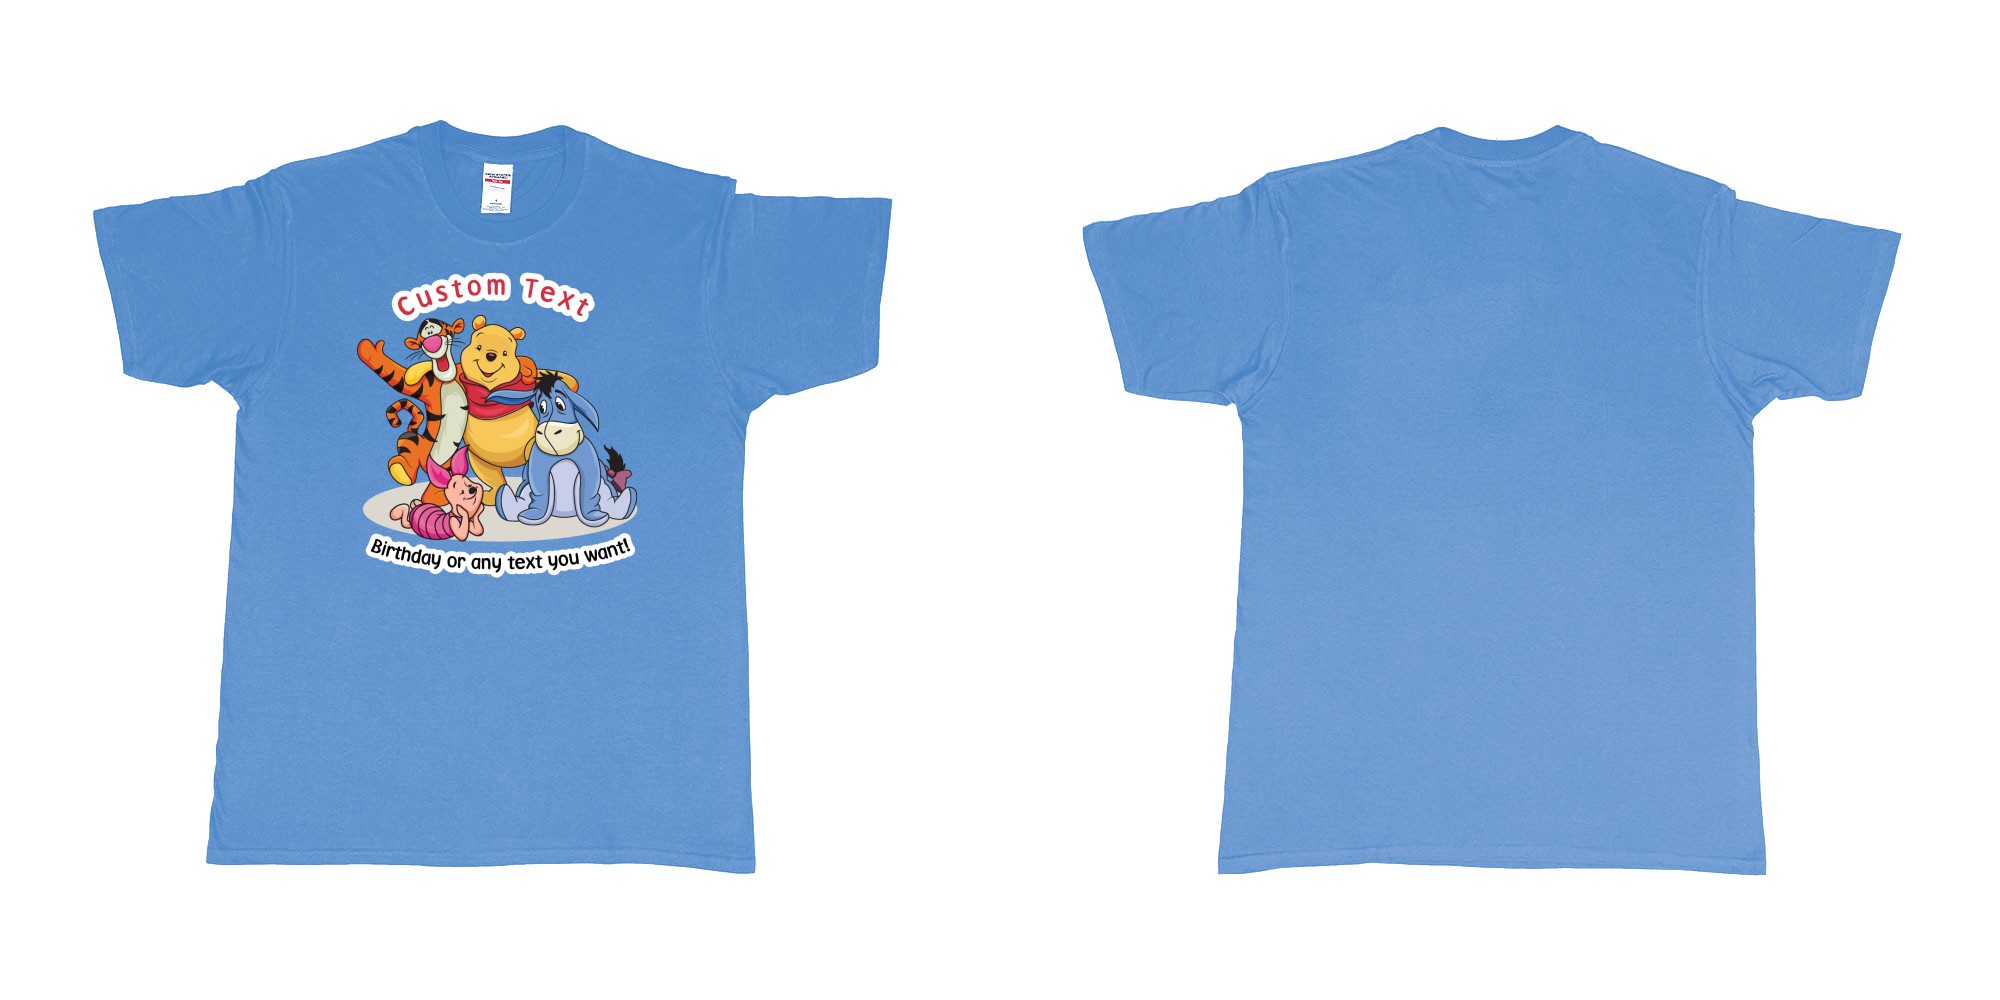 Custom tshirt design winnie the pooh and friend in fabric color carolina-blue choice your own text made in Bali by The Pirate Way